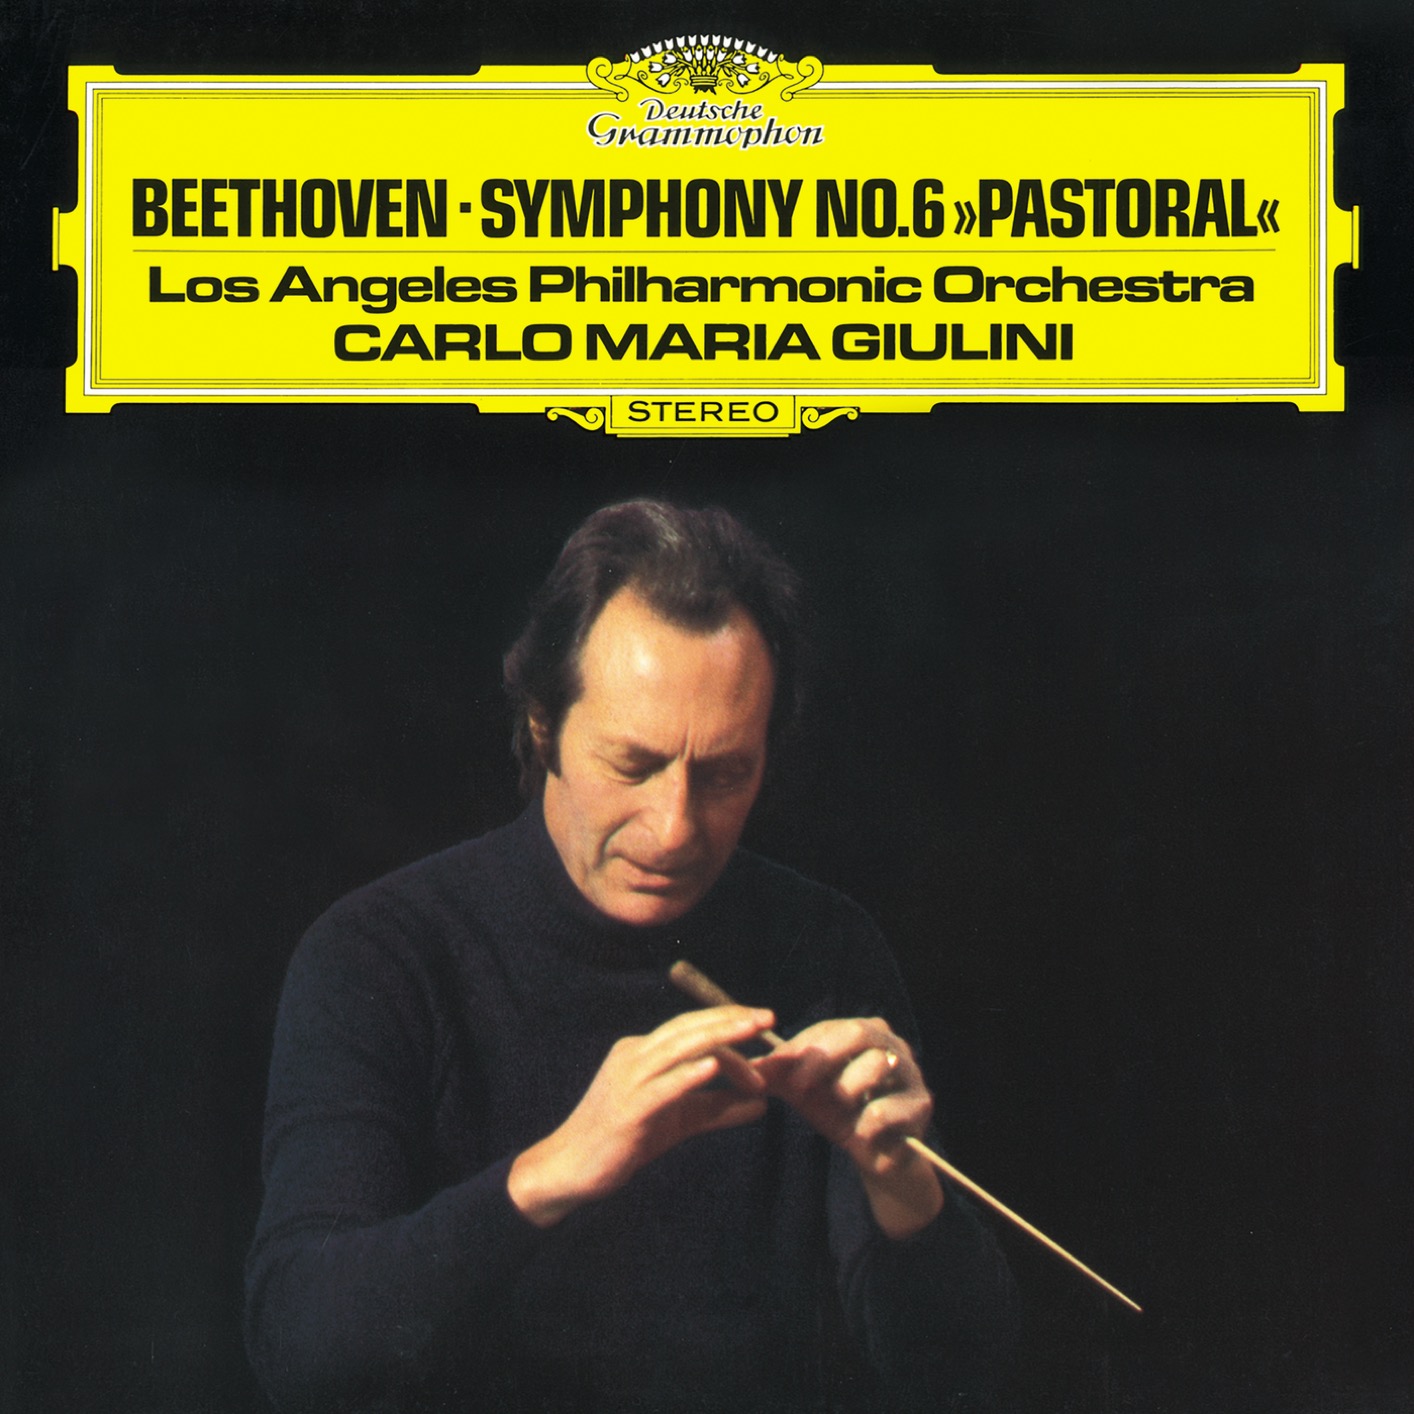 Los Angeles Philharmonic Orchestra & Carlo Maria Giulini – Beethoven: Symphony No.6 in F, Op. 68 (Remastered) (2019) [FLAC 24bit/96kHz]